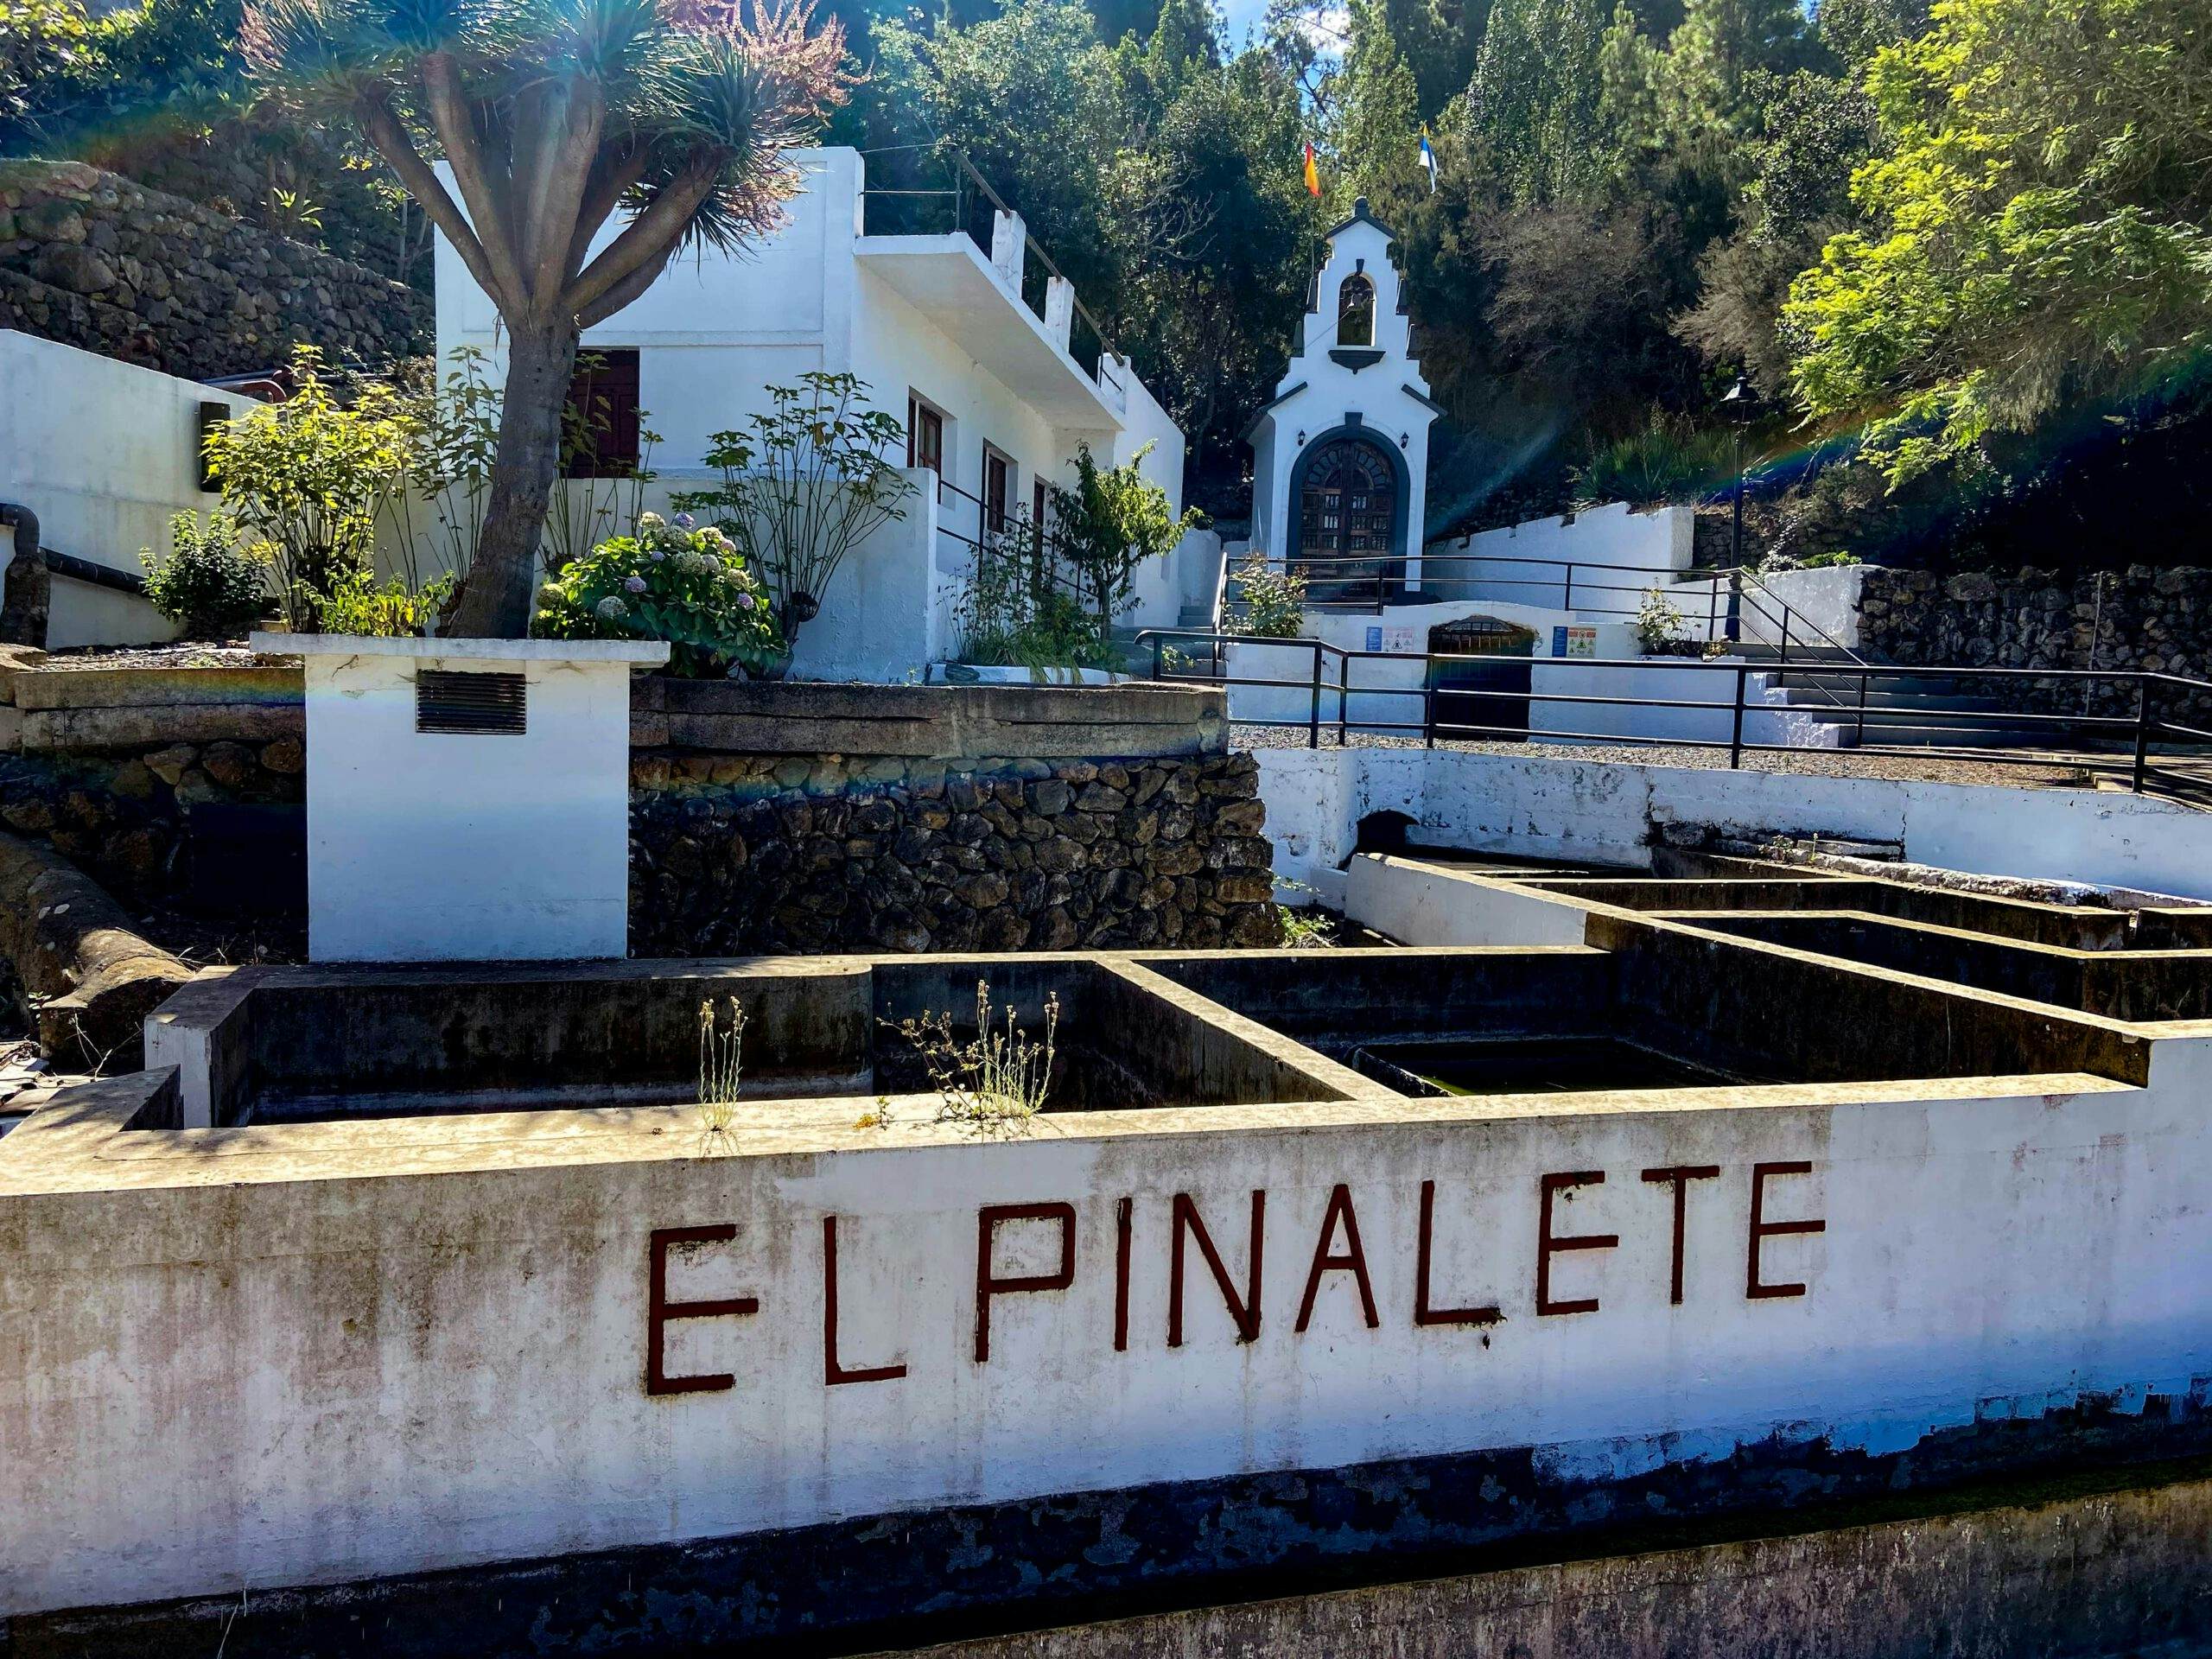 Starting point of the hike - El Pinalete